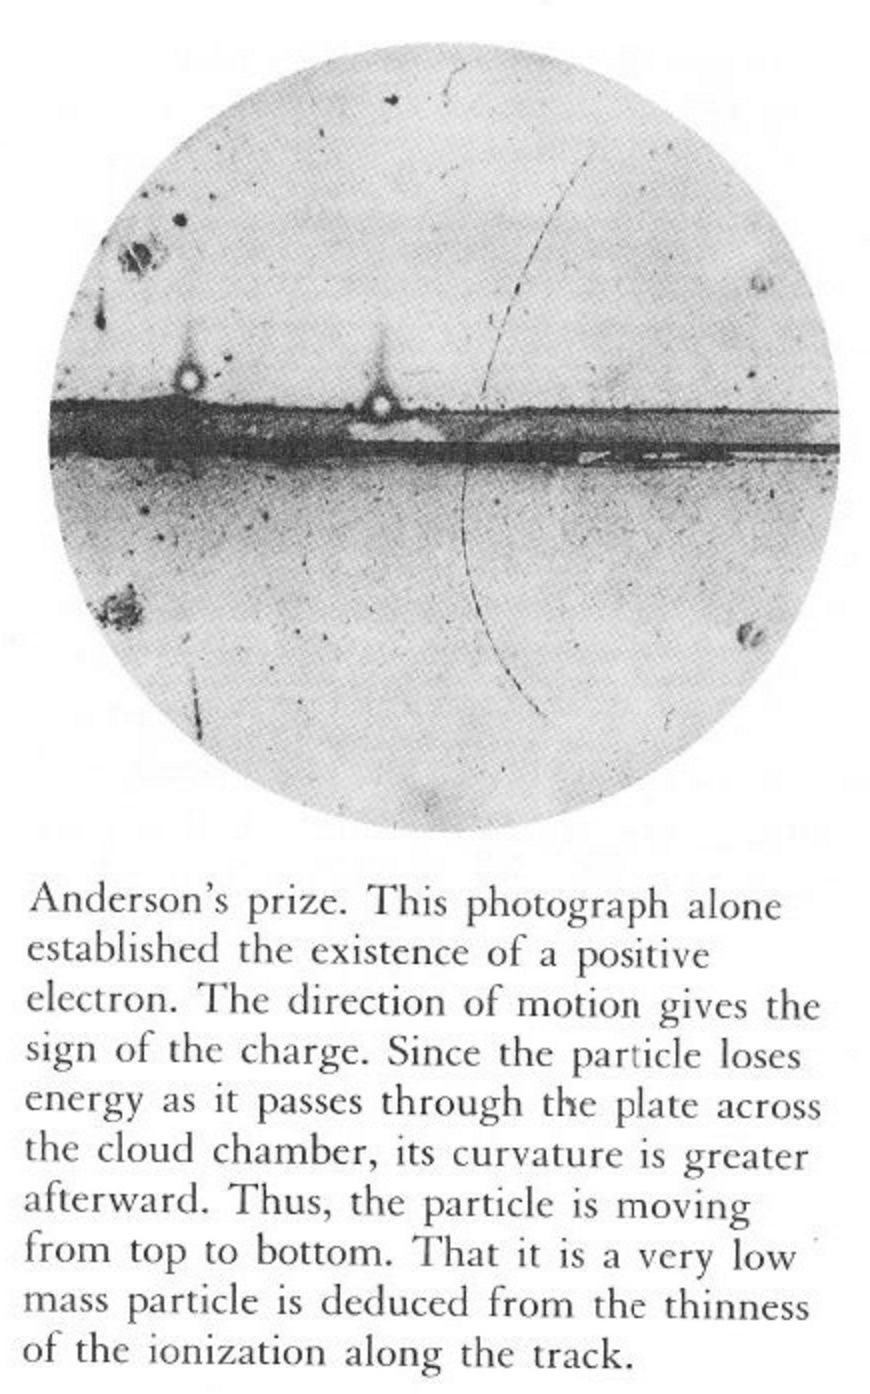 Anderson s high-precision cloud chamber photograph: Simultaneously, the